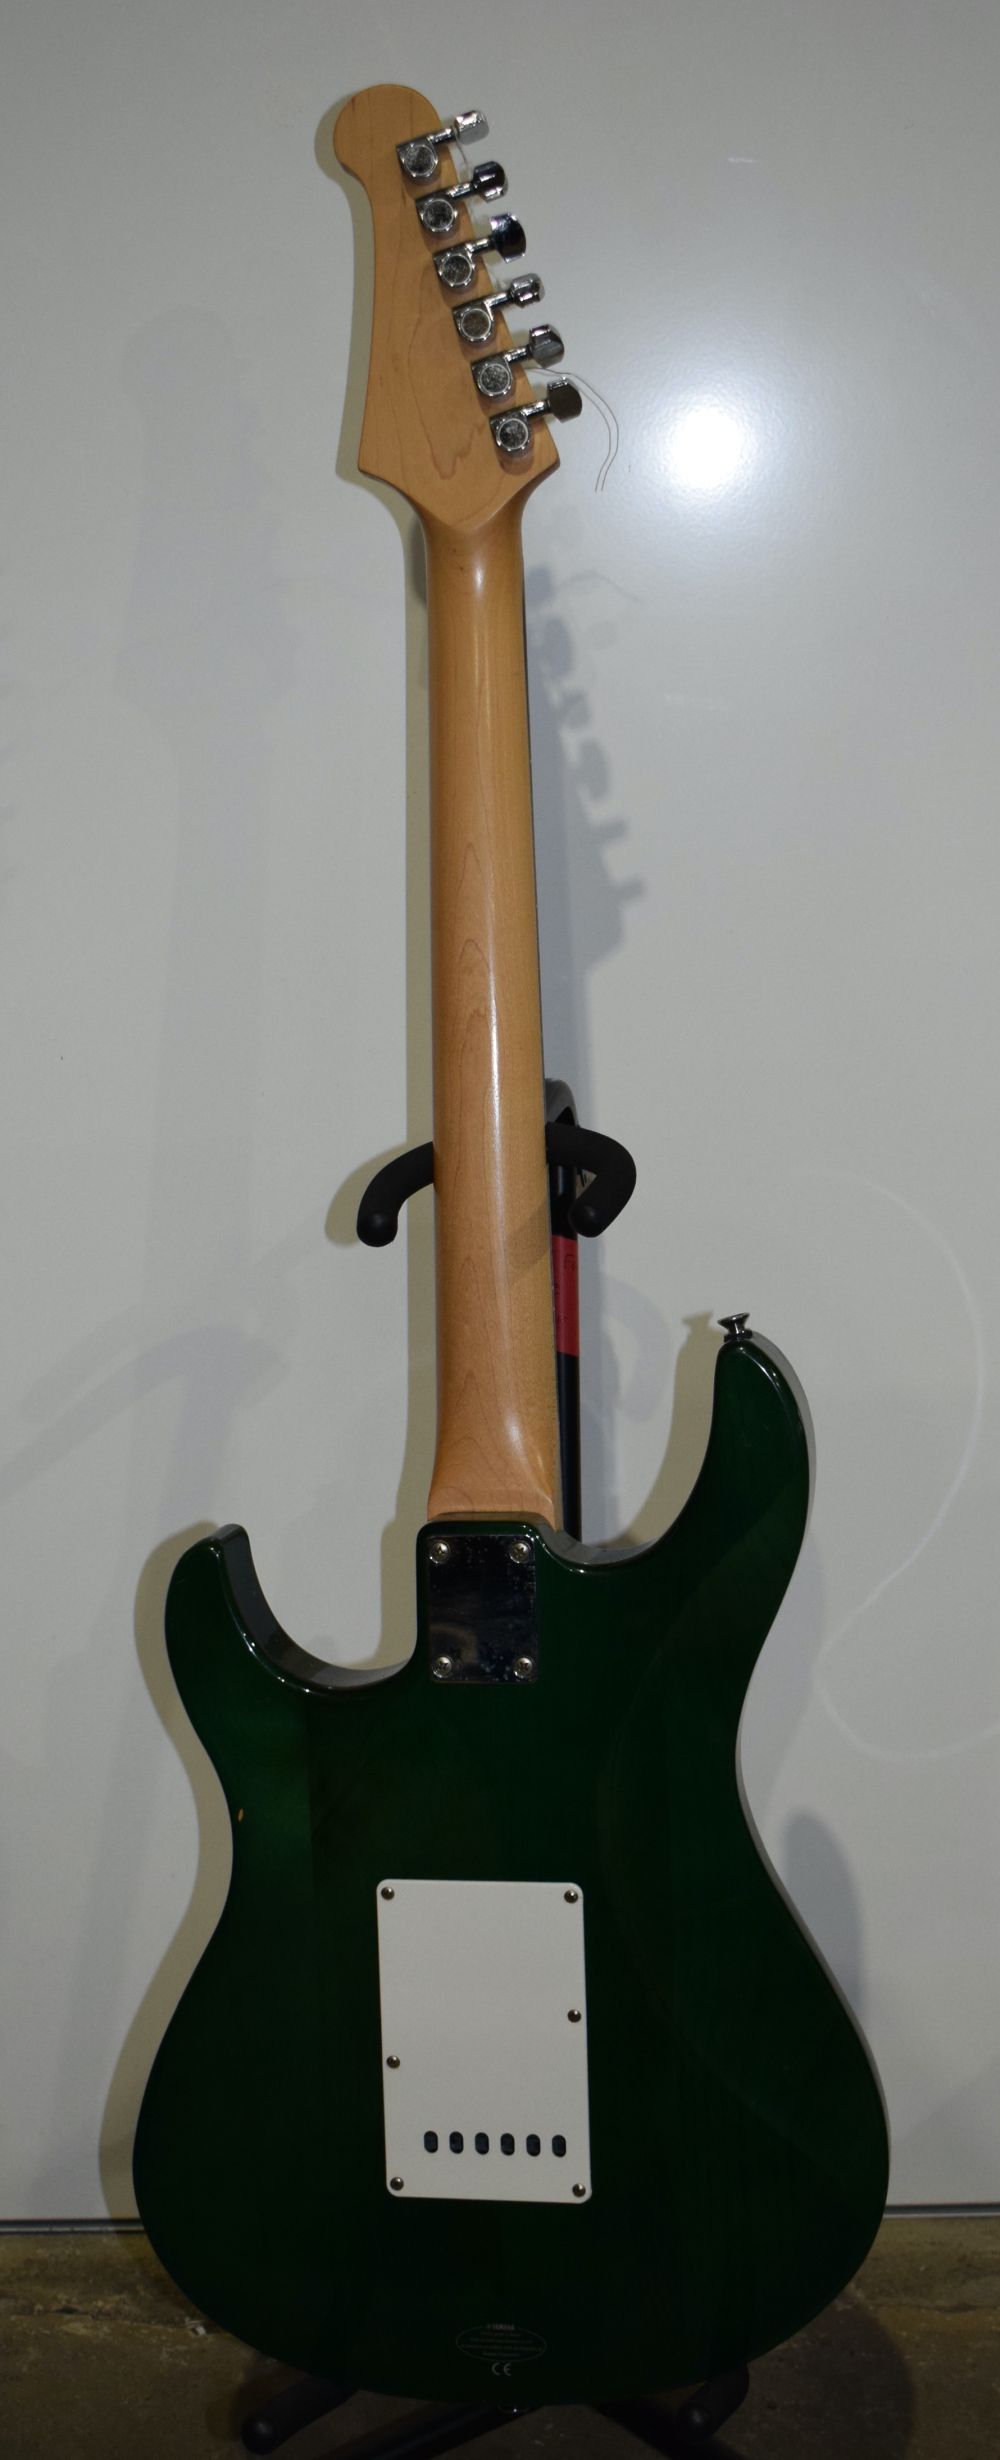 A Yamaha Pacifica electric guitar 99cm - Image 8 of 8